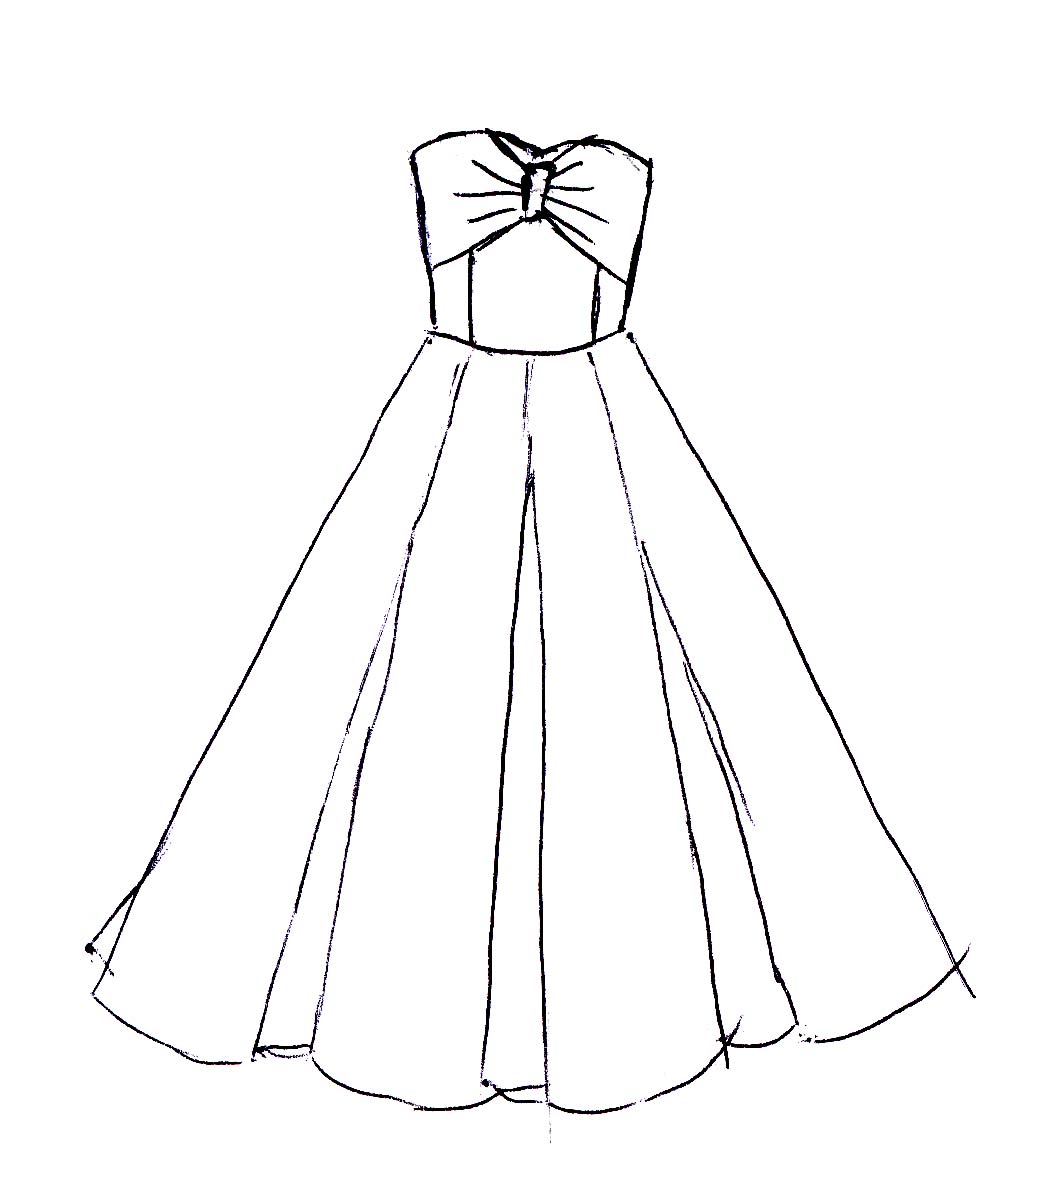 How To Draw A Dress Easy For Kids